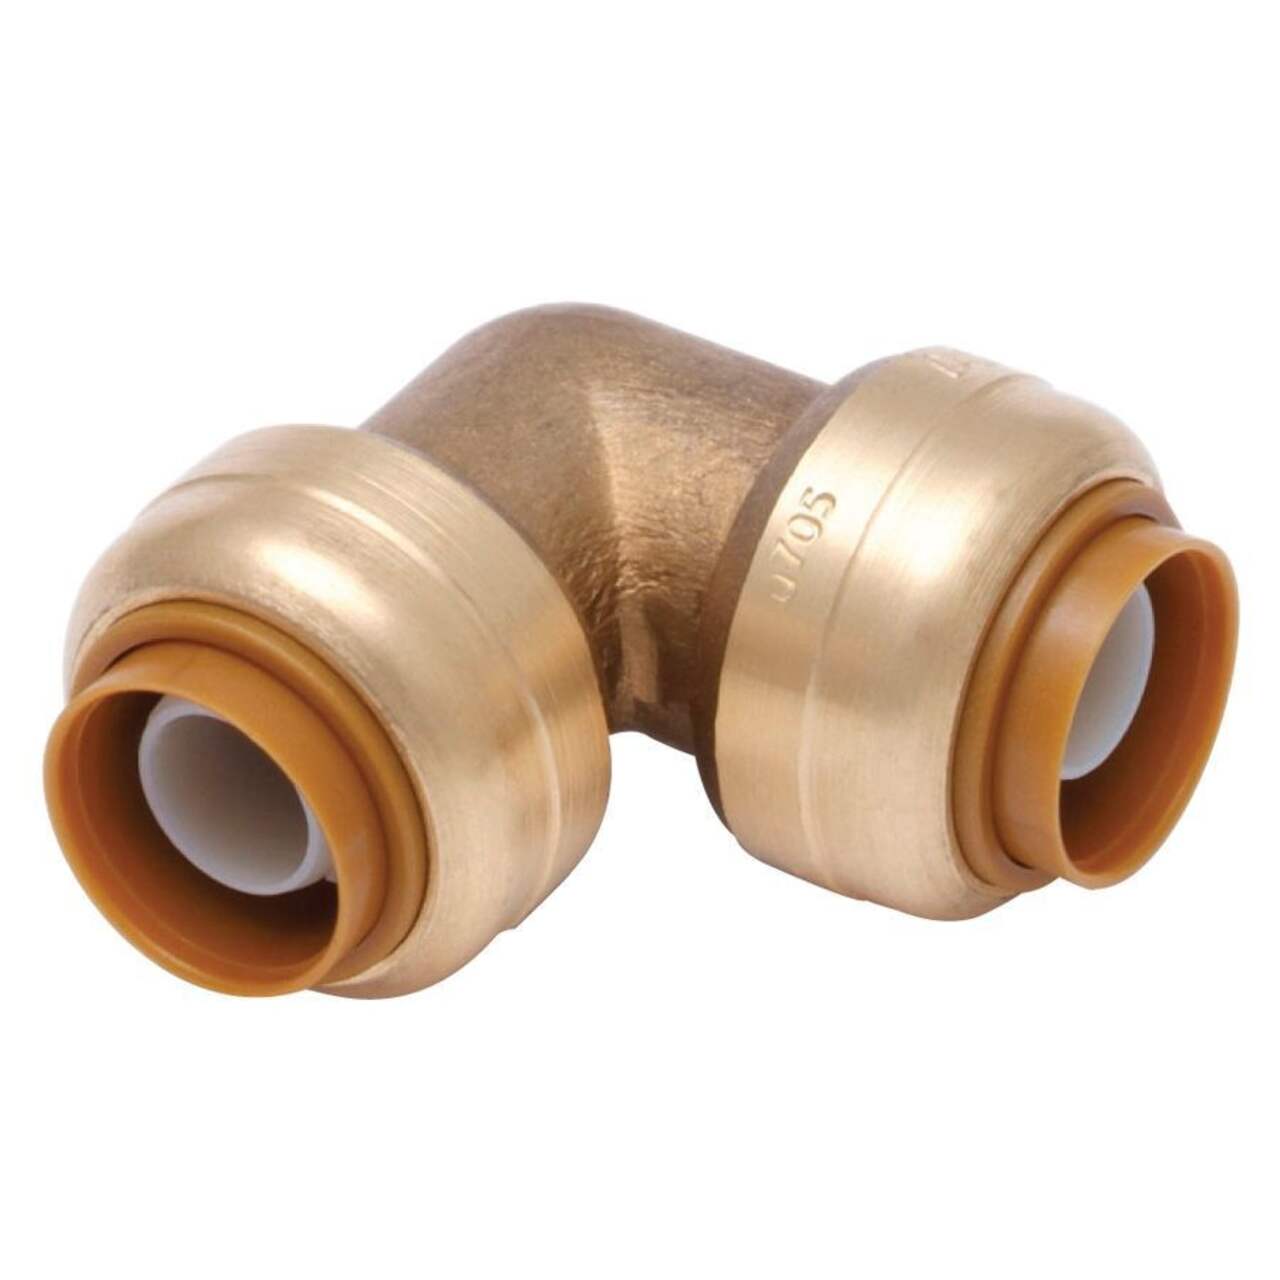 https://media-www.canadiantire.ca/product/fixing/plumbing/rough-plumbing/0631807/push-n-connect-1-2-90-degree-elbow-1003ae62-2031-4584-80d7-16c3c4ed2a0d-jpgrendition.jpg?imdensity=1&imwidth=640&impolicy=mZoom